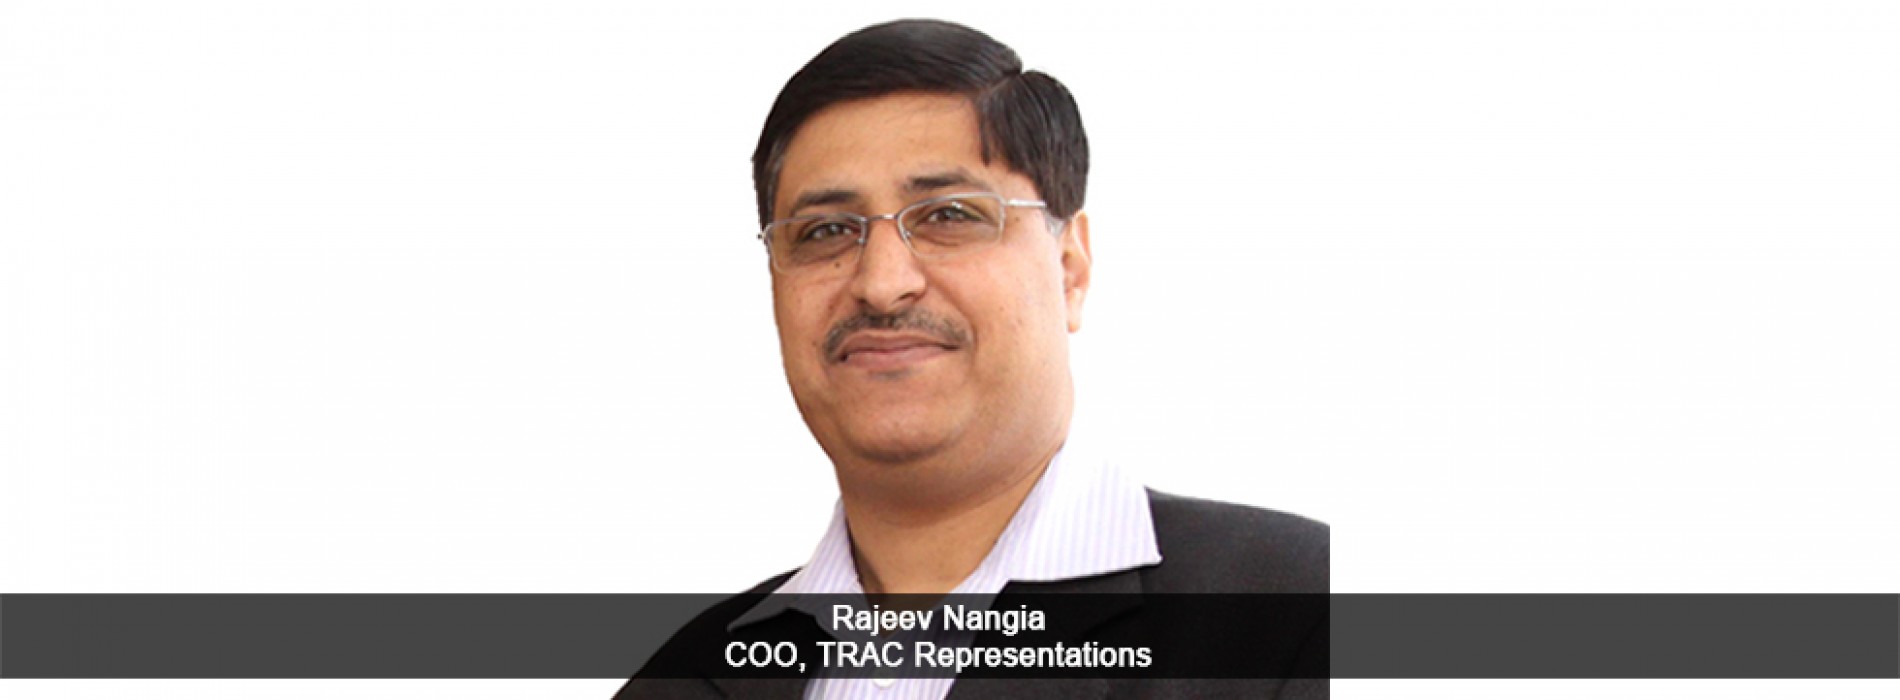 MMPRC appoints TRAC Representations as its Marketing Representative in India